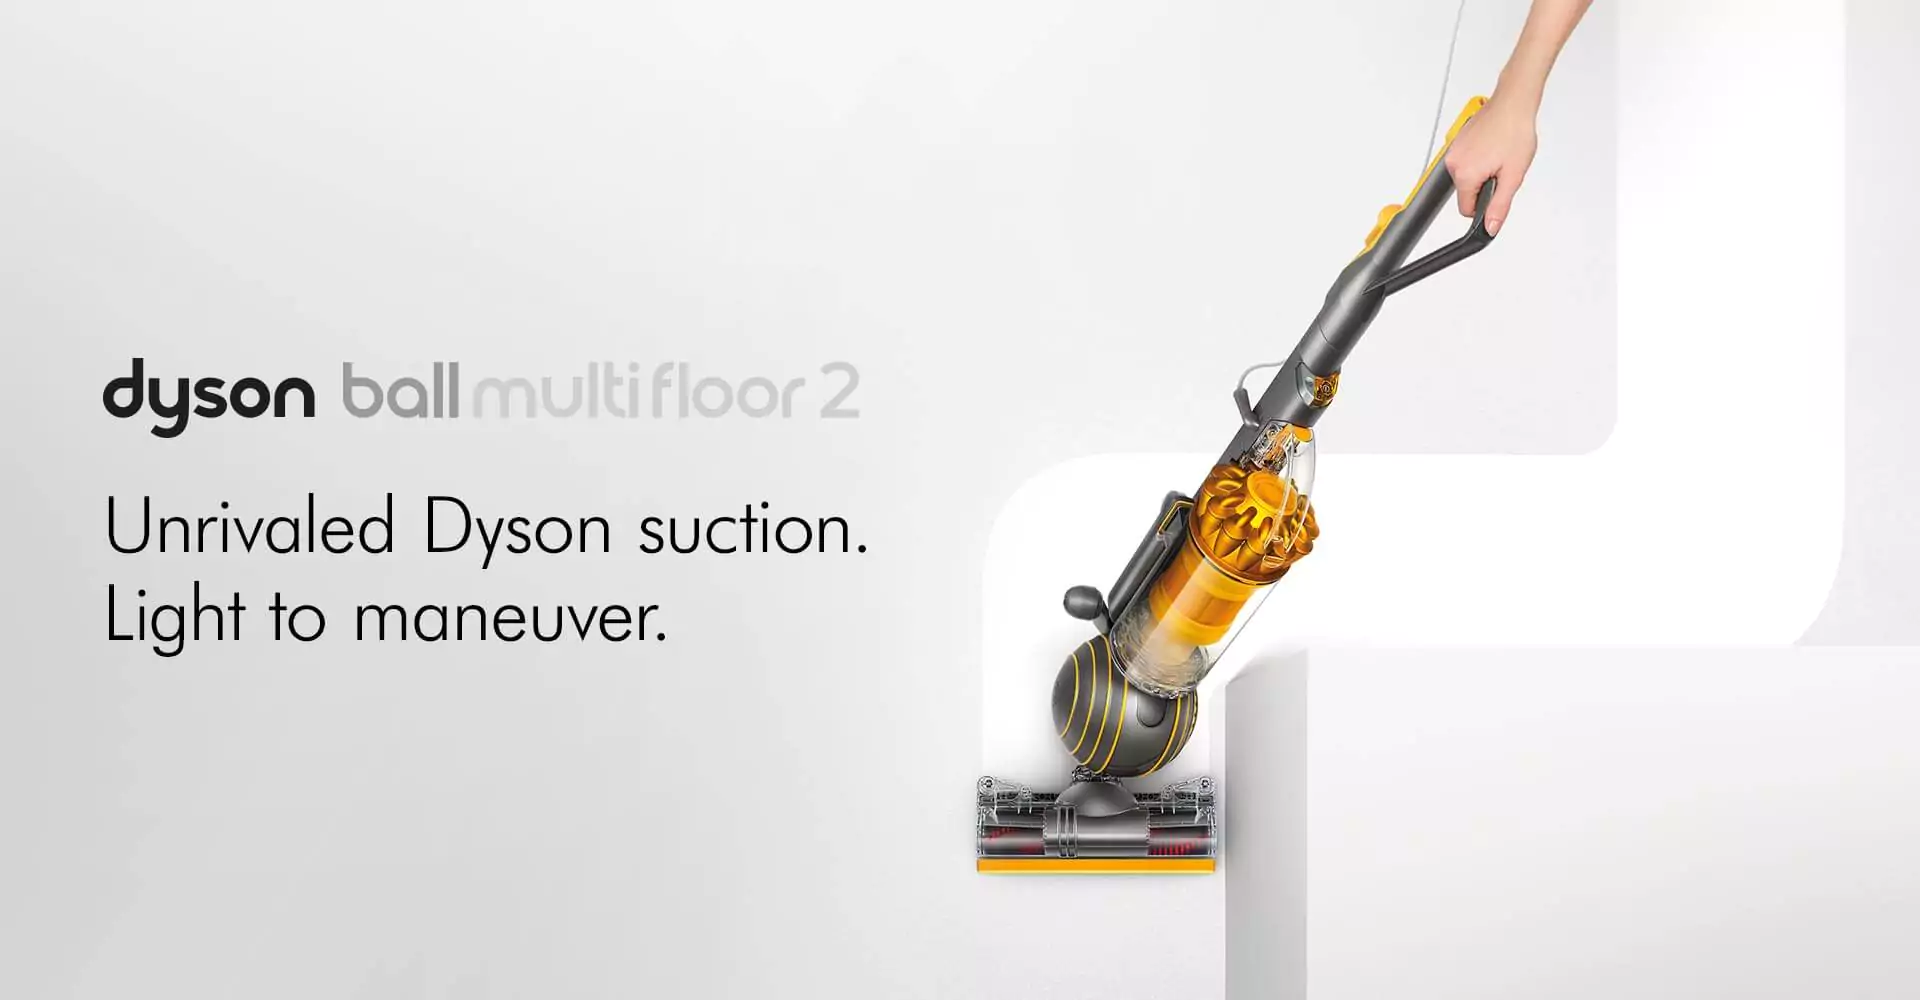 Dyson uprights Multifloor 2 campaign image